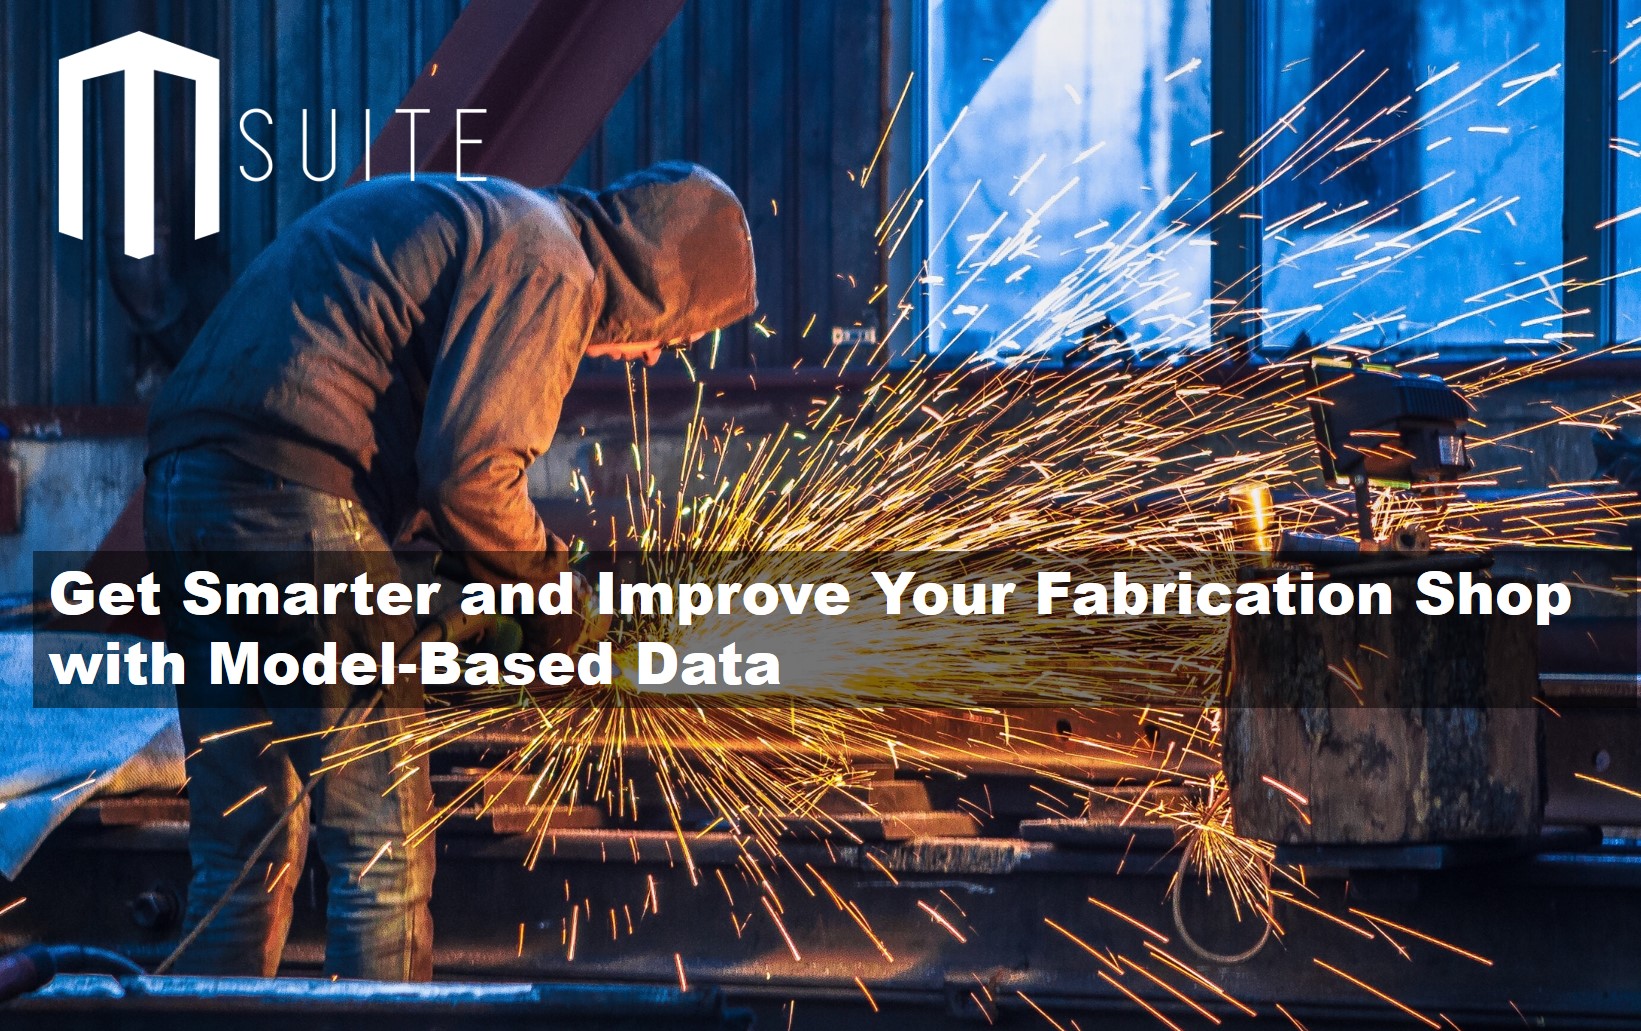 Get Smarter – Improve Your Fabrication Shop with Model-Based Data